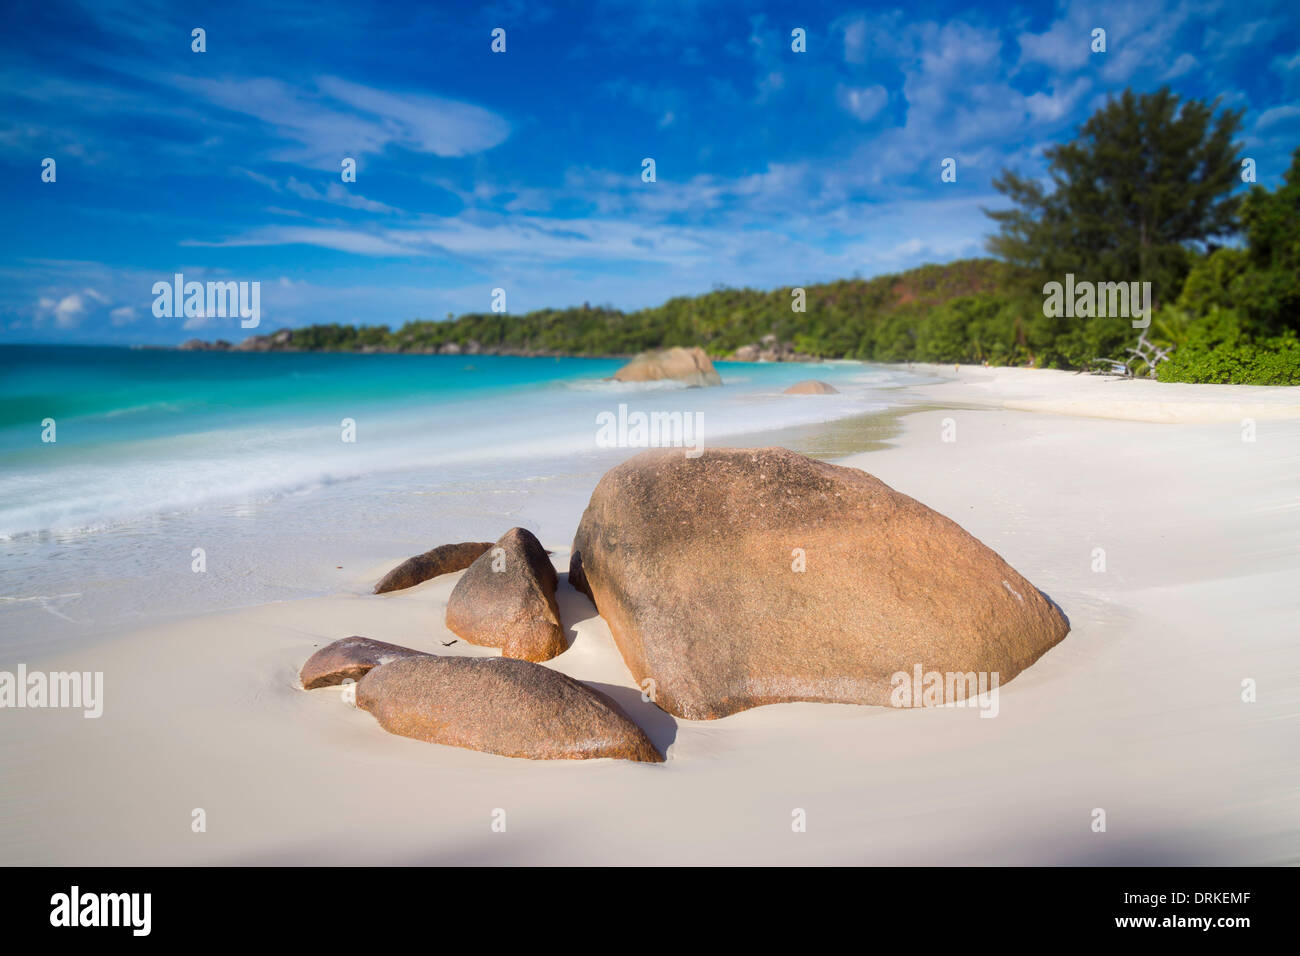 Fantastic sandy beach with the typical for the rock formations Seychelles, Anse Lazio, Baie Chevalier, Praslin, Seychelles, Indian Ocean, Africa - 2013 Stock Photo